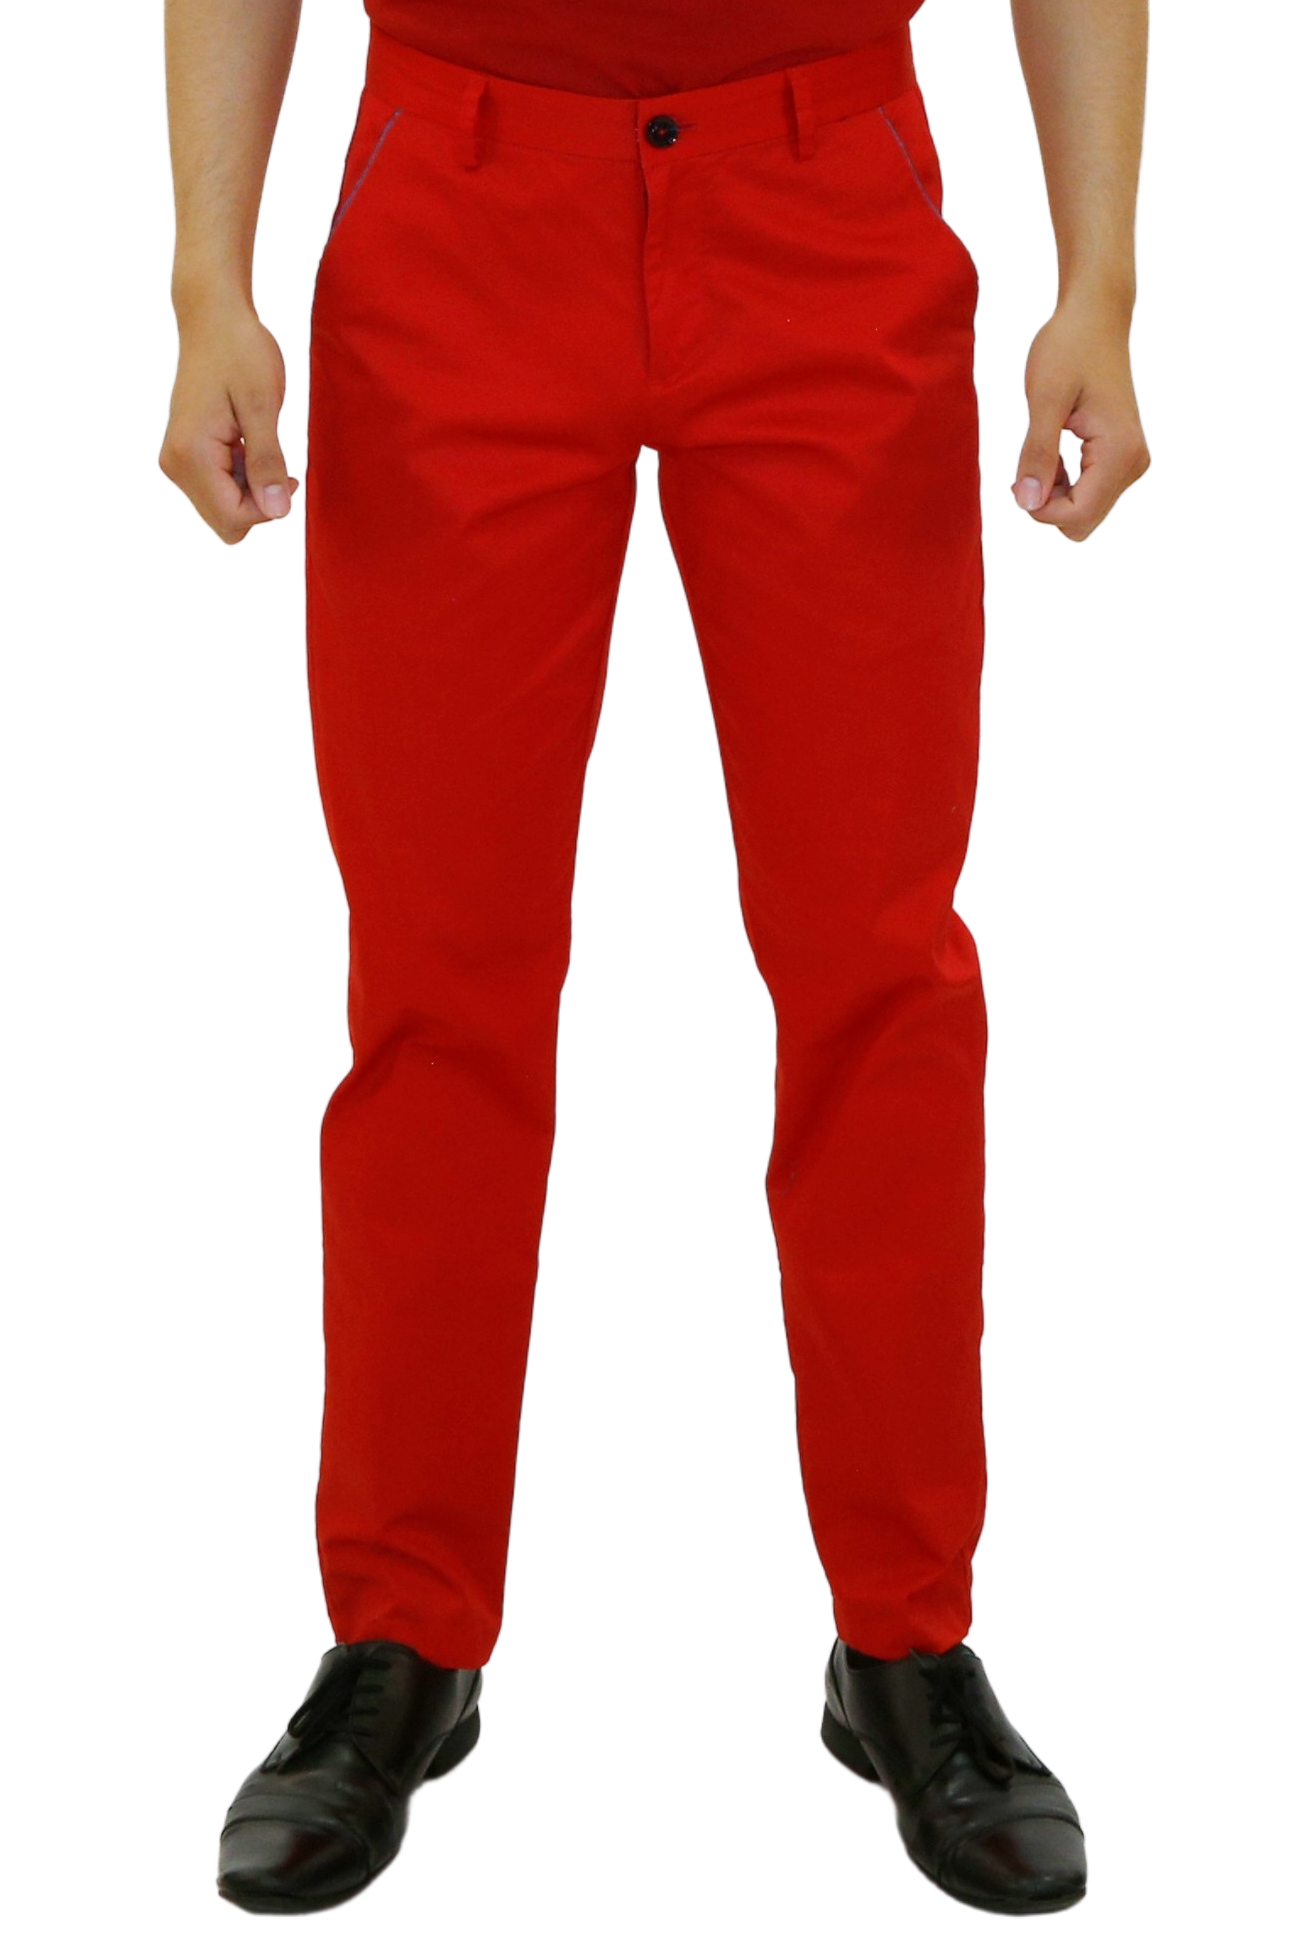 Men's pants chinos - dark red P830 | MODONE wholesale - Clothing For Men